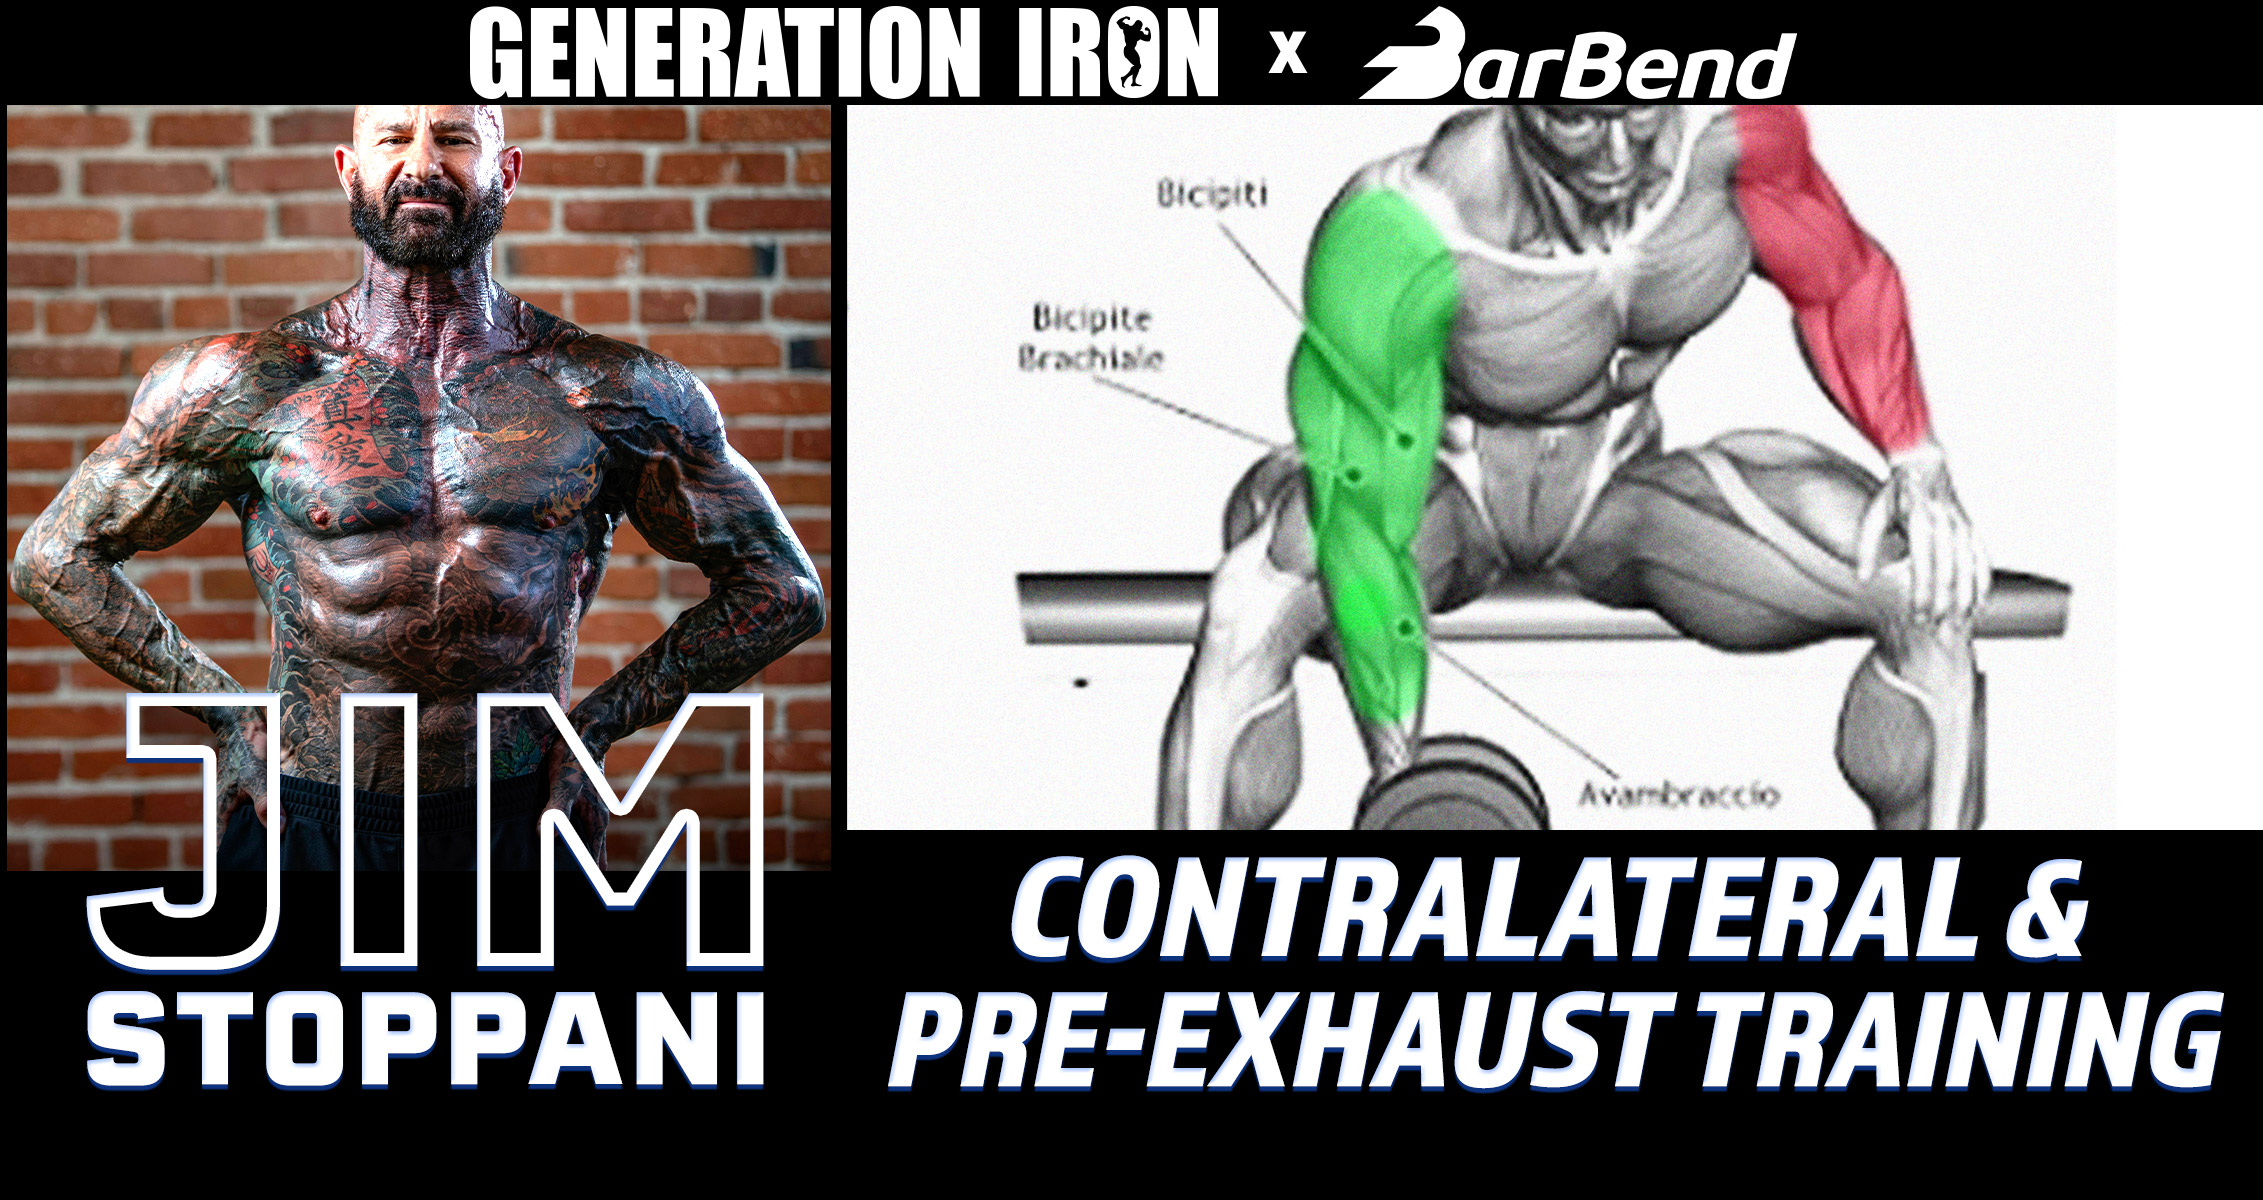 Jim Stoppani: Contralateral & Pre-Exhaust Training, Explained